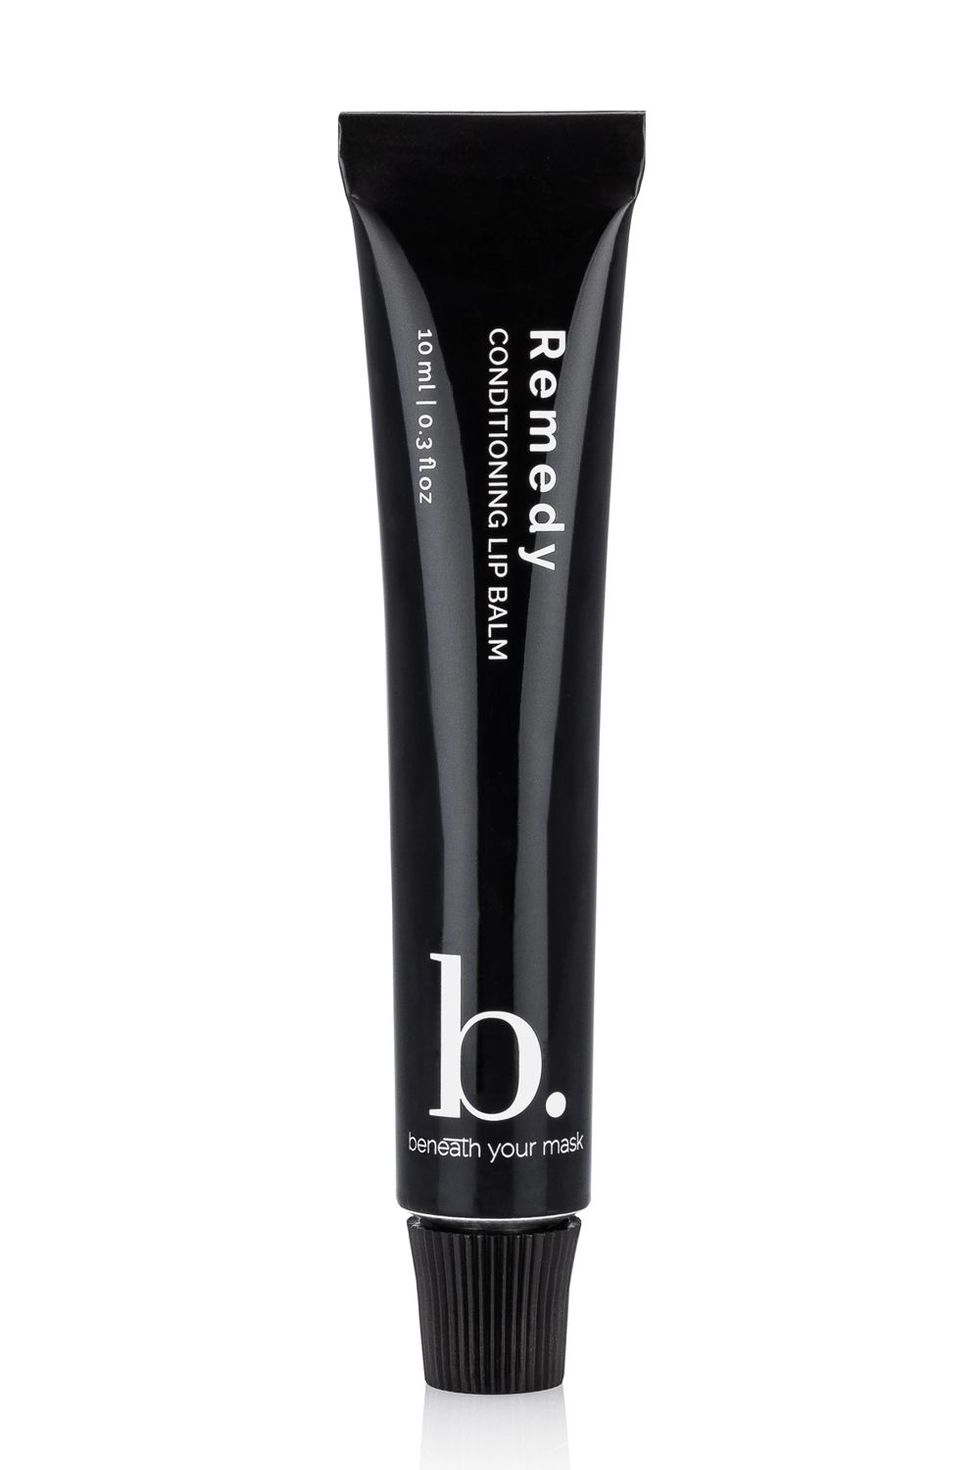 Beneath Your Mask Remedy Conditioning Lip Balm